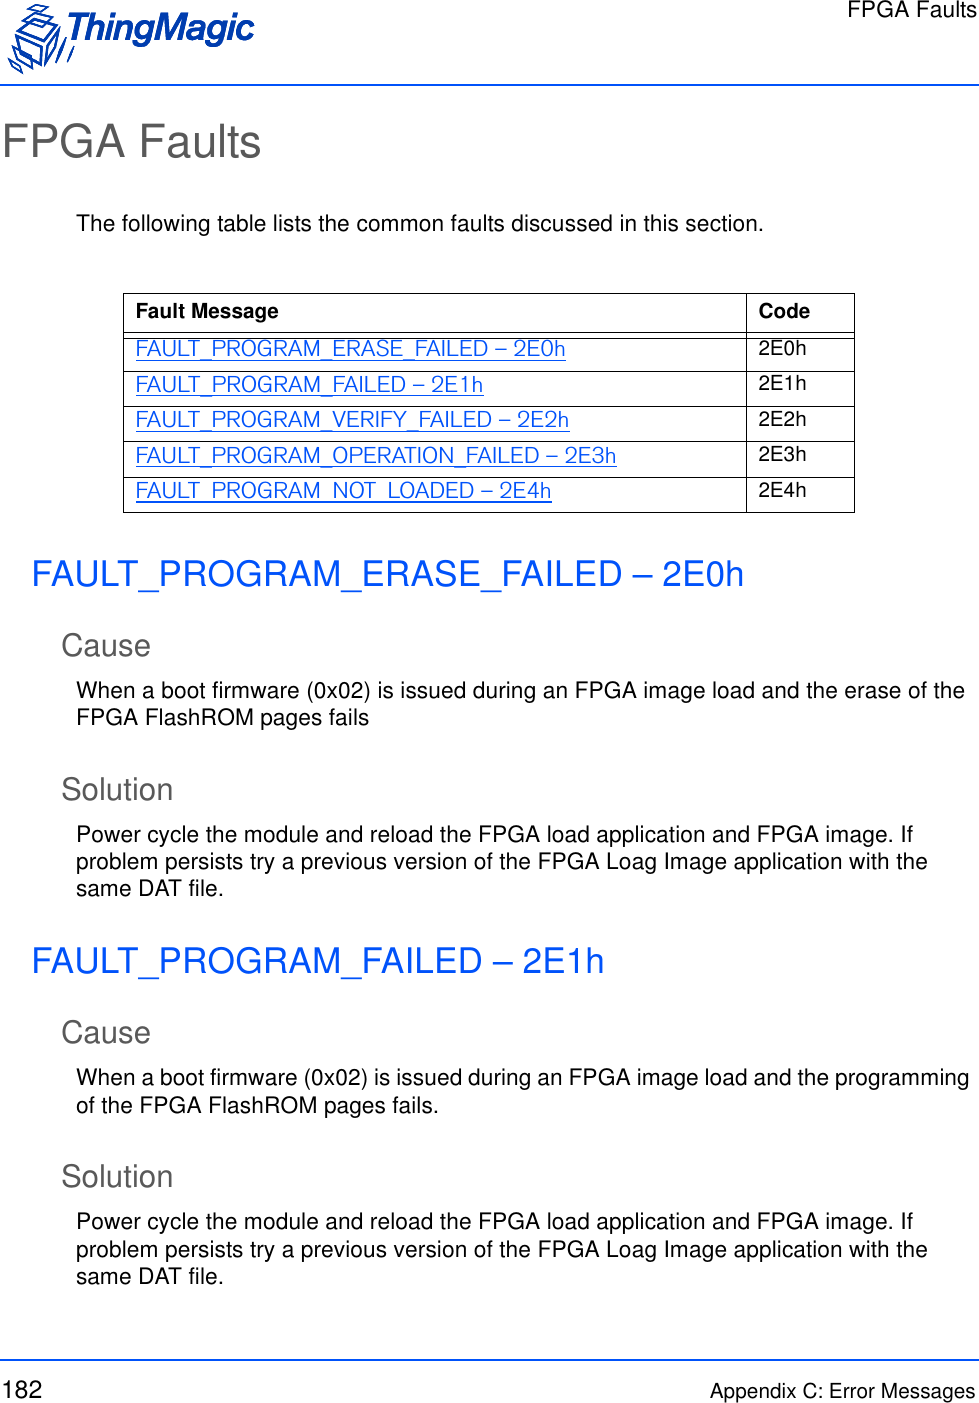 FPGA Faults182 Appendix C: Error MessagesFPGA FaultsThe following table lists the common faults discussed in this section.FAULT_PROGRAM_ERASE_FAILED – 2E0hCauseWhen a boot firmware (0x02) is issued during an FPGA image load and the erase of the FPGA FlashROM pages failsSolutionPower cycle the module and reload the FPGA load application and FPGA image. If problem persists try a previous version of the FPGA Loag Image application with the same DAT file.FAULT_PROGRAM_FAILED – 2E1hCauseWhen a boot firmware (0x02) is issued during an FPGA image load and the programming of the FPGA FlashROM pages fails.SolutionPower cycle the module and reload the FPGA load application and FPGA image. If problem persists try a previous version of the FPGA Loag Image application with the same DAT file.Fault Message CodeFAULT_PROGRAM_ERASE_FAILED – 2E0h 2E0hFAULT_PROGRAM_FAILED – 2E1h 2E1hFAULT_PROGRAM_VERIFY_FAILED – 2E2h 2E2hFAULT_PROGRAM_OPERATION_FAILED – 2E3h 2E3hFAULT_PROGRAM_NOT_LOADED – 2E4h 2E4h